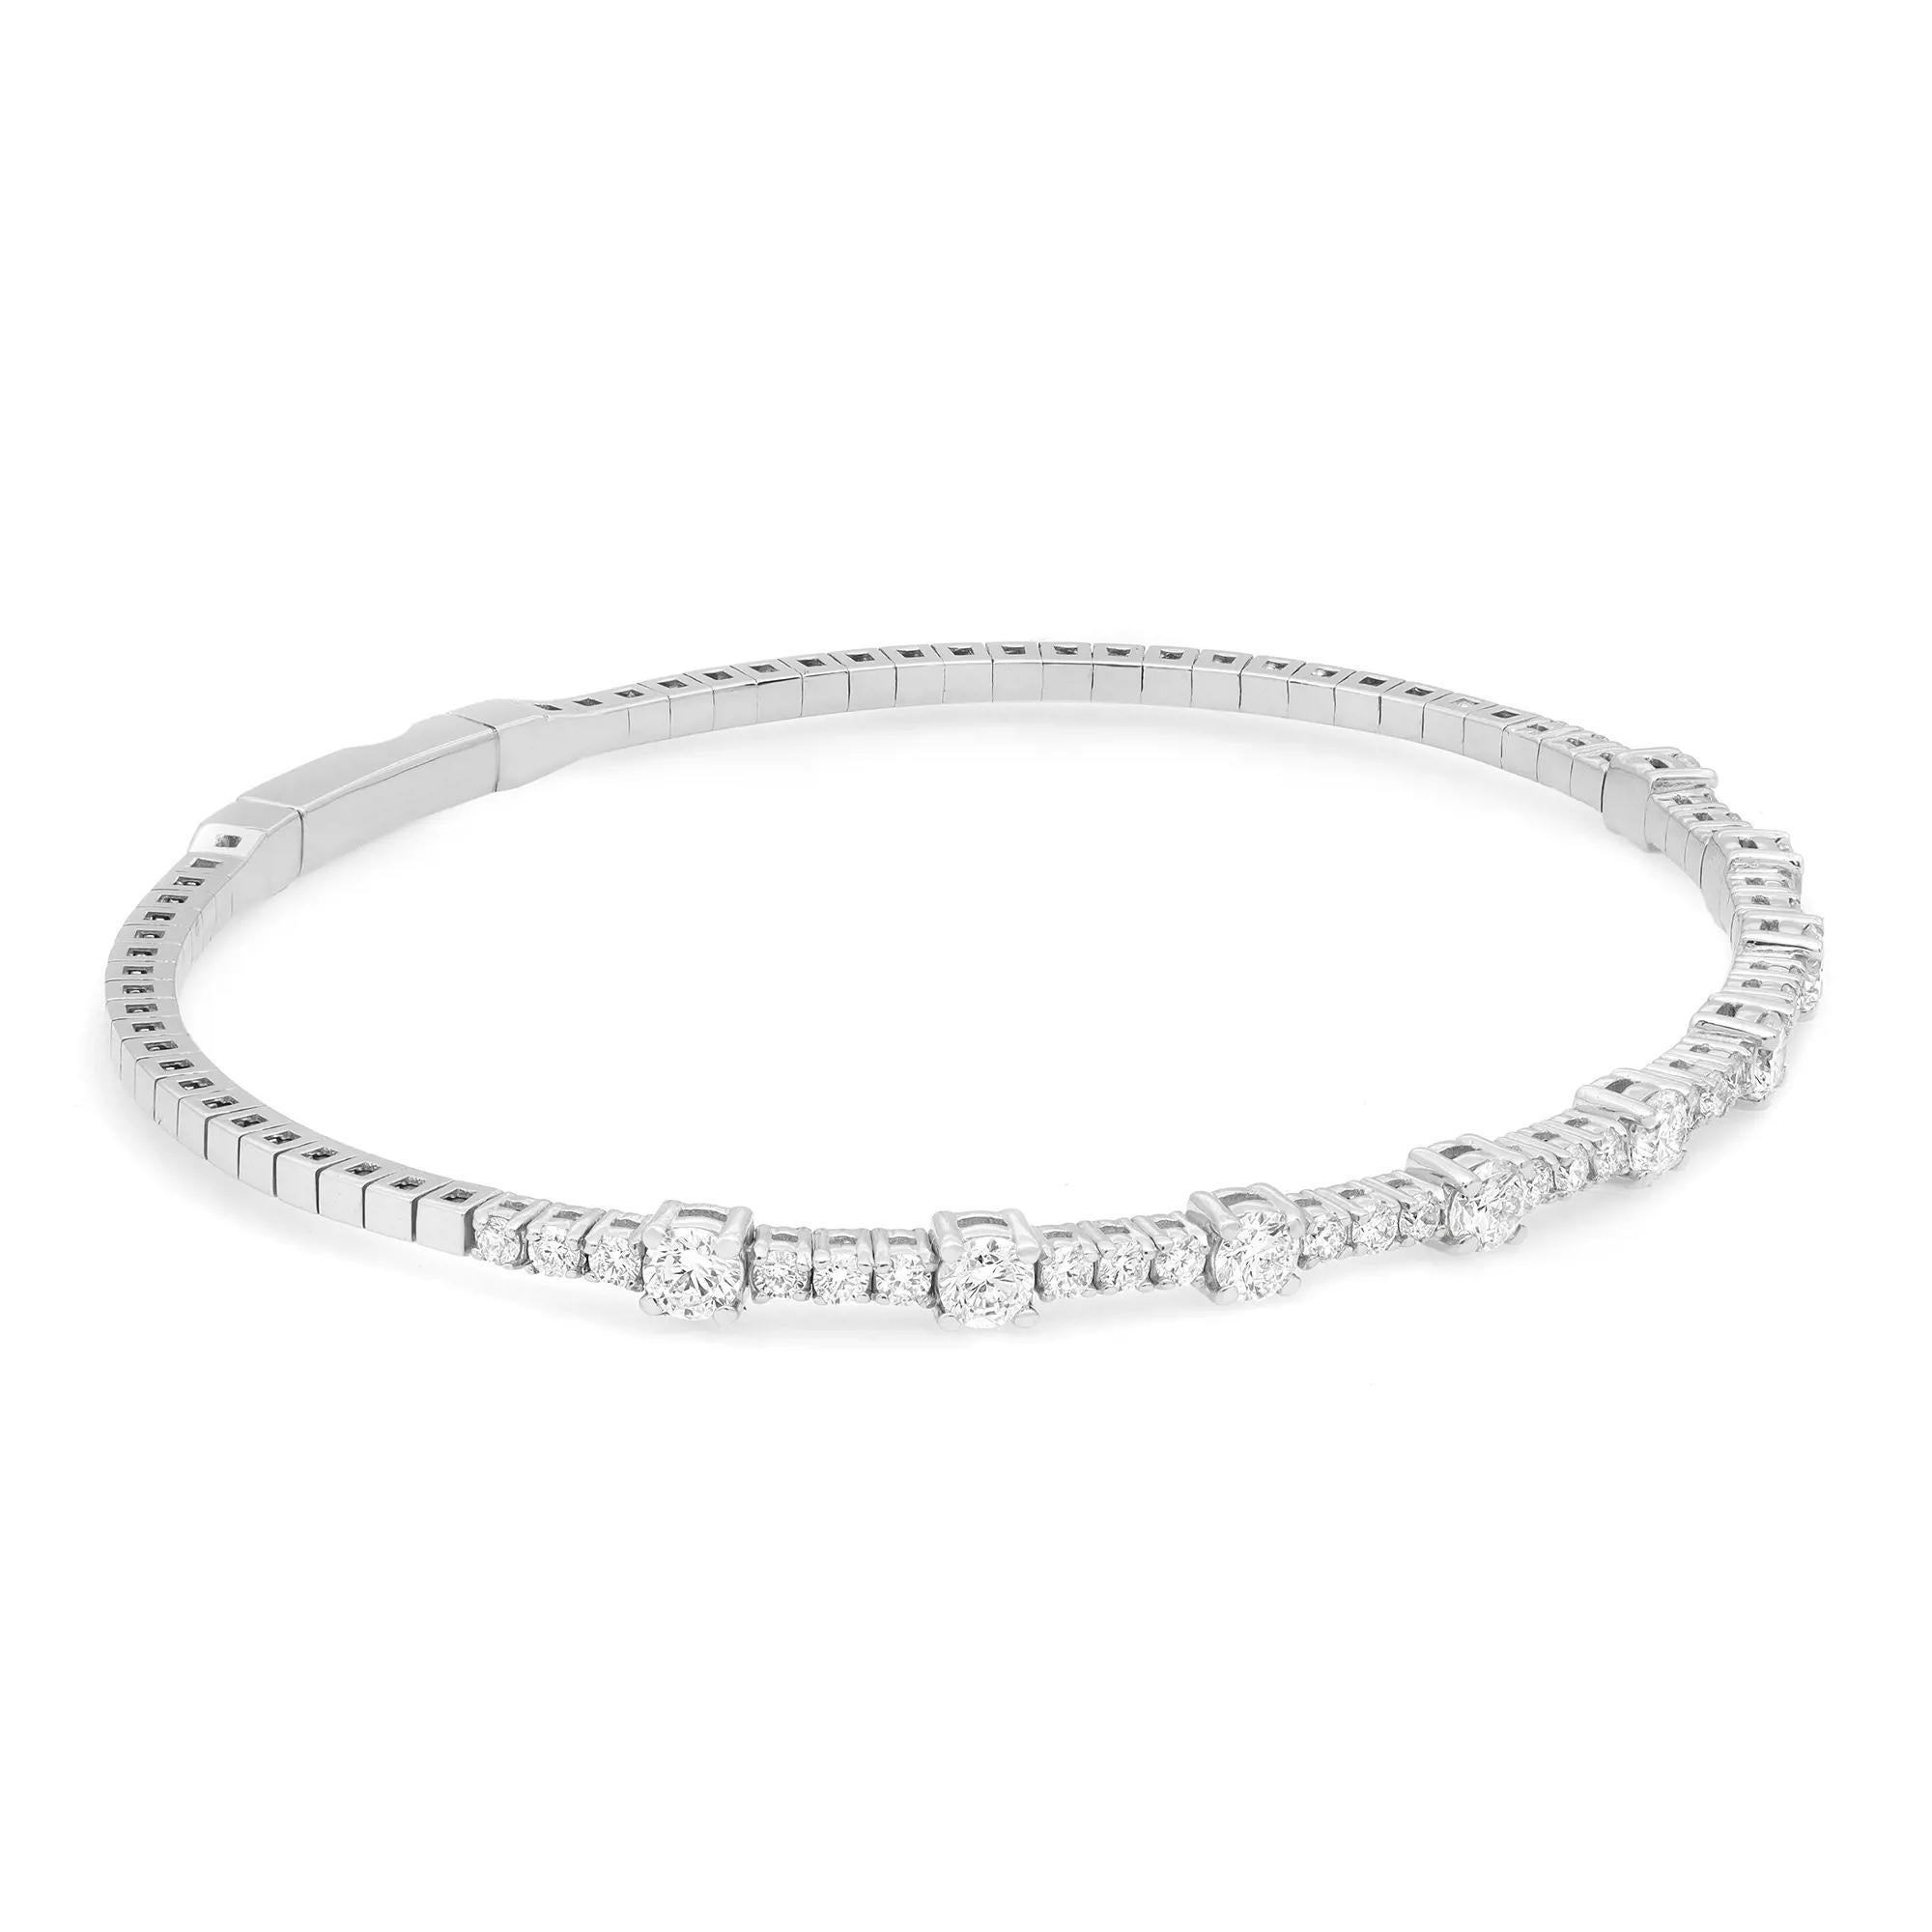 A classic look with easy elegance, this flexible diamond bangle bracelet exudes sophistication. Features prong set round brilliant cut fine white diamonds weighing 1.50 carats, set halfway through the bangle. Crafted in high polished 14K white gold.